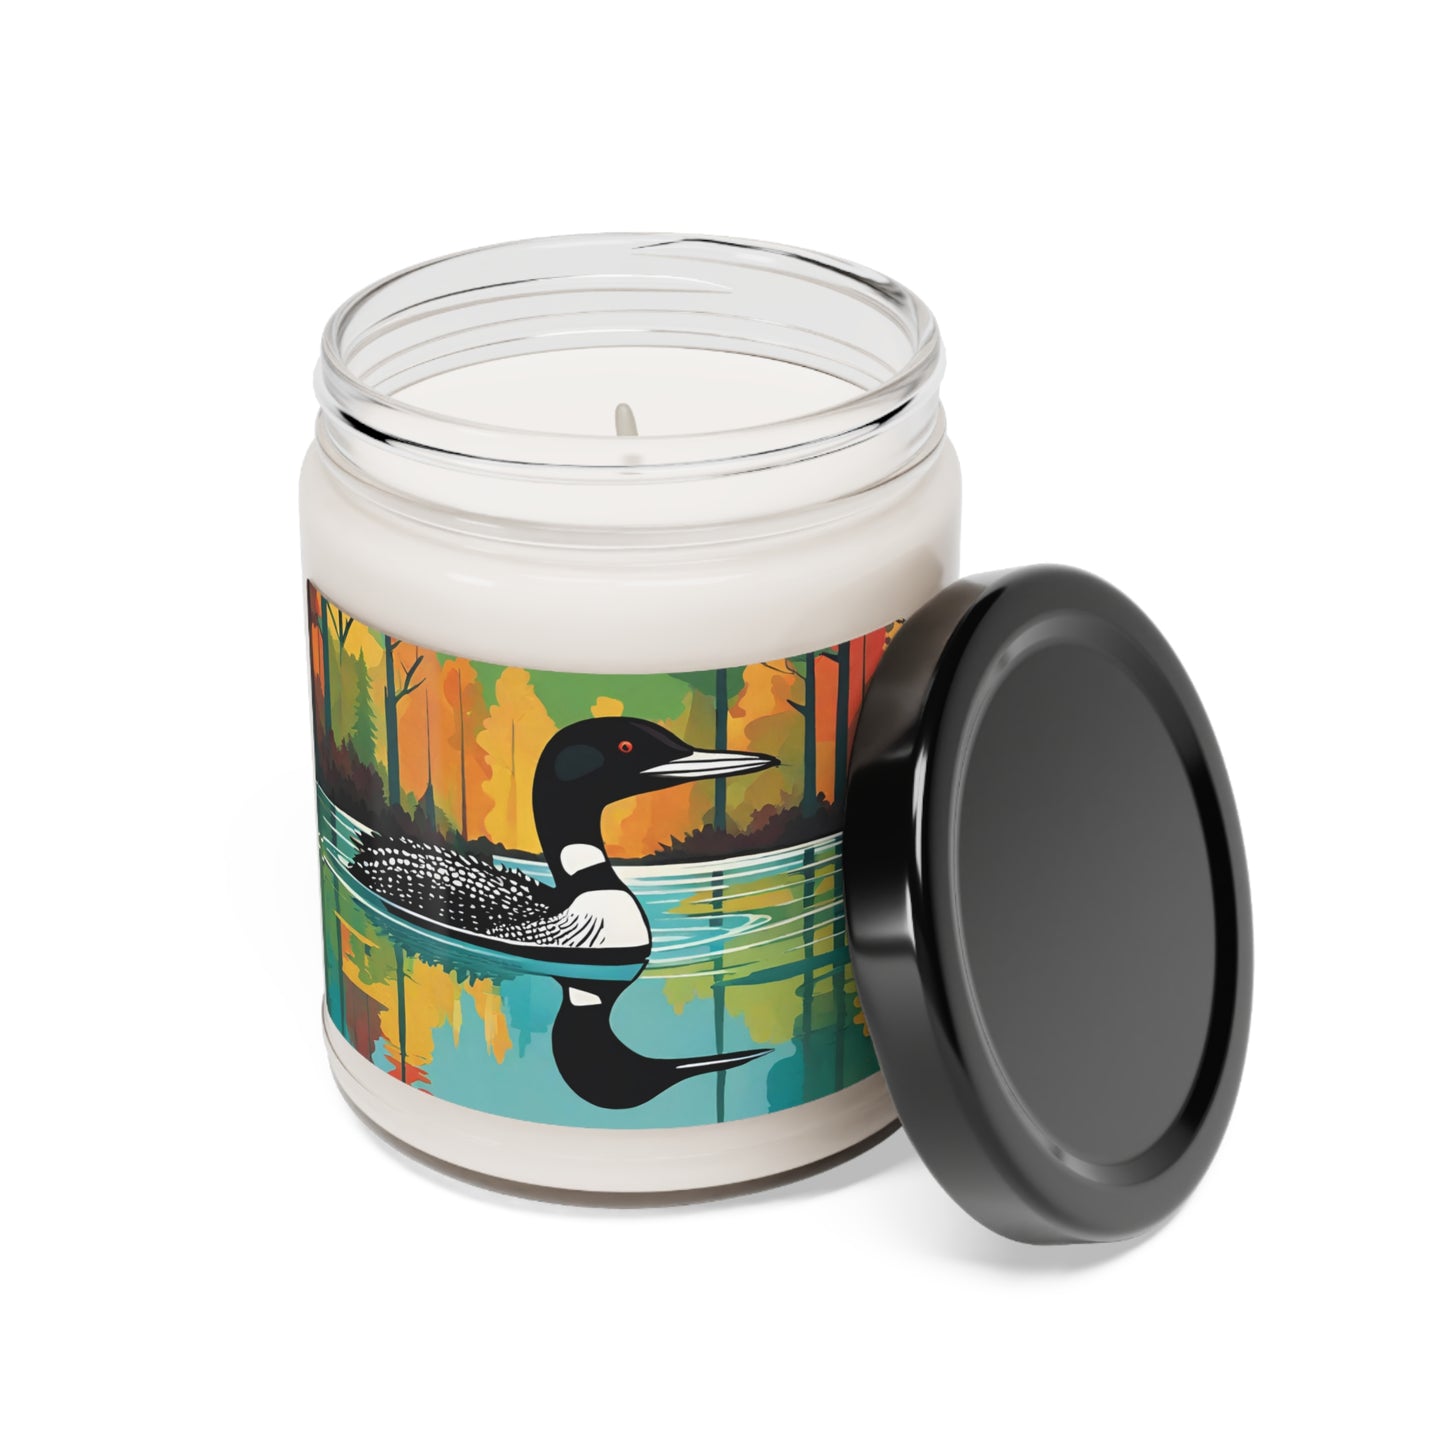 Scented Soy Candle, 9oz - My MN Loon